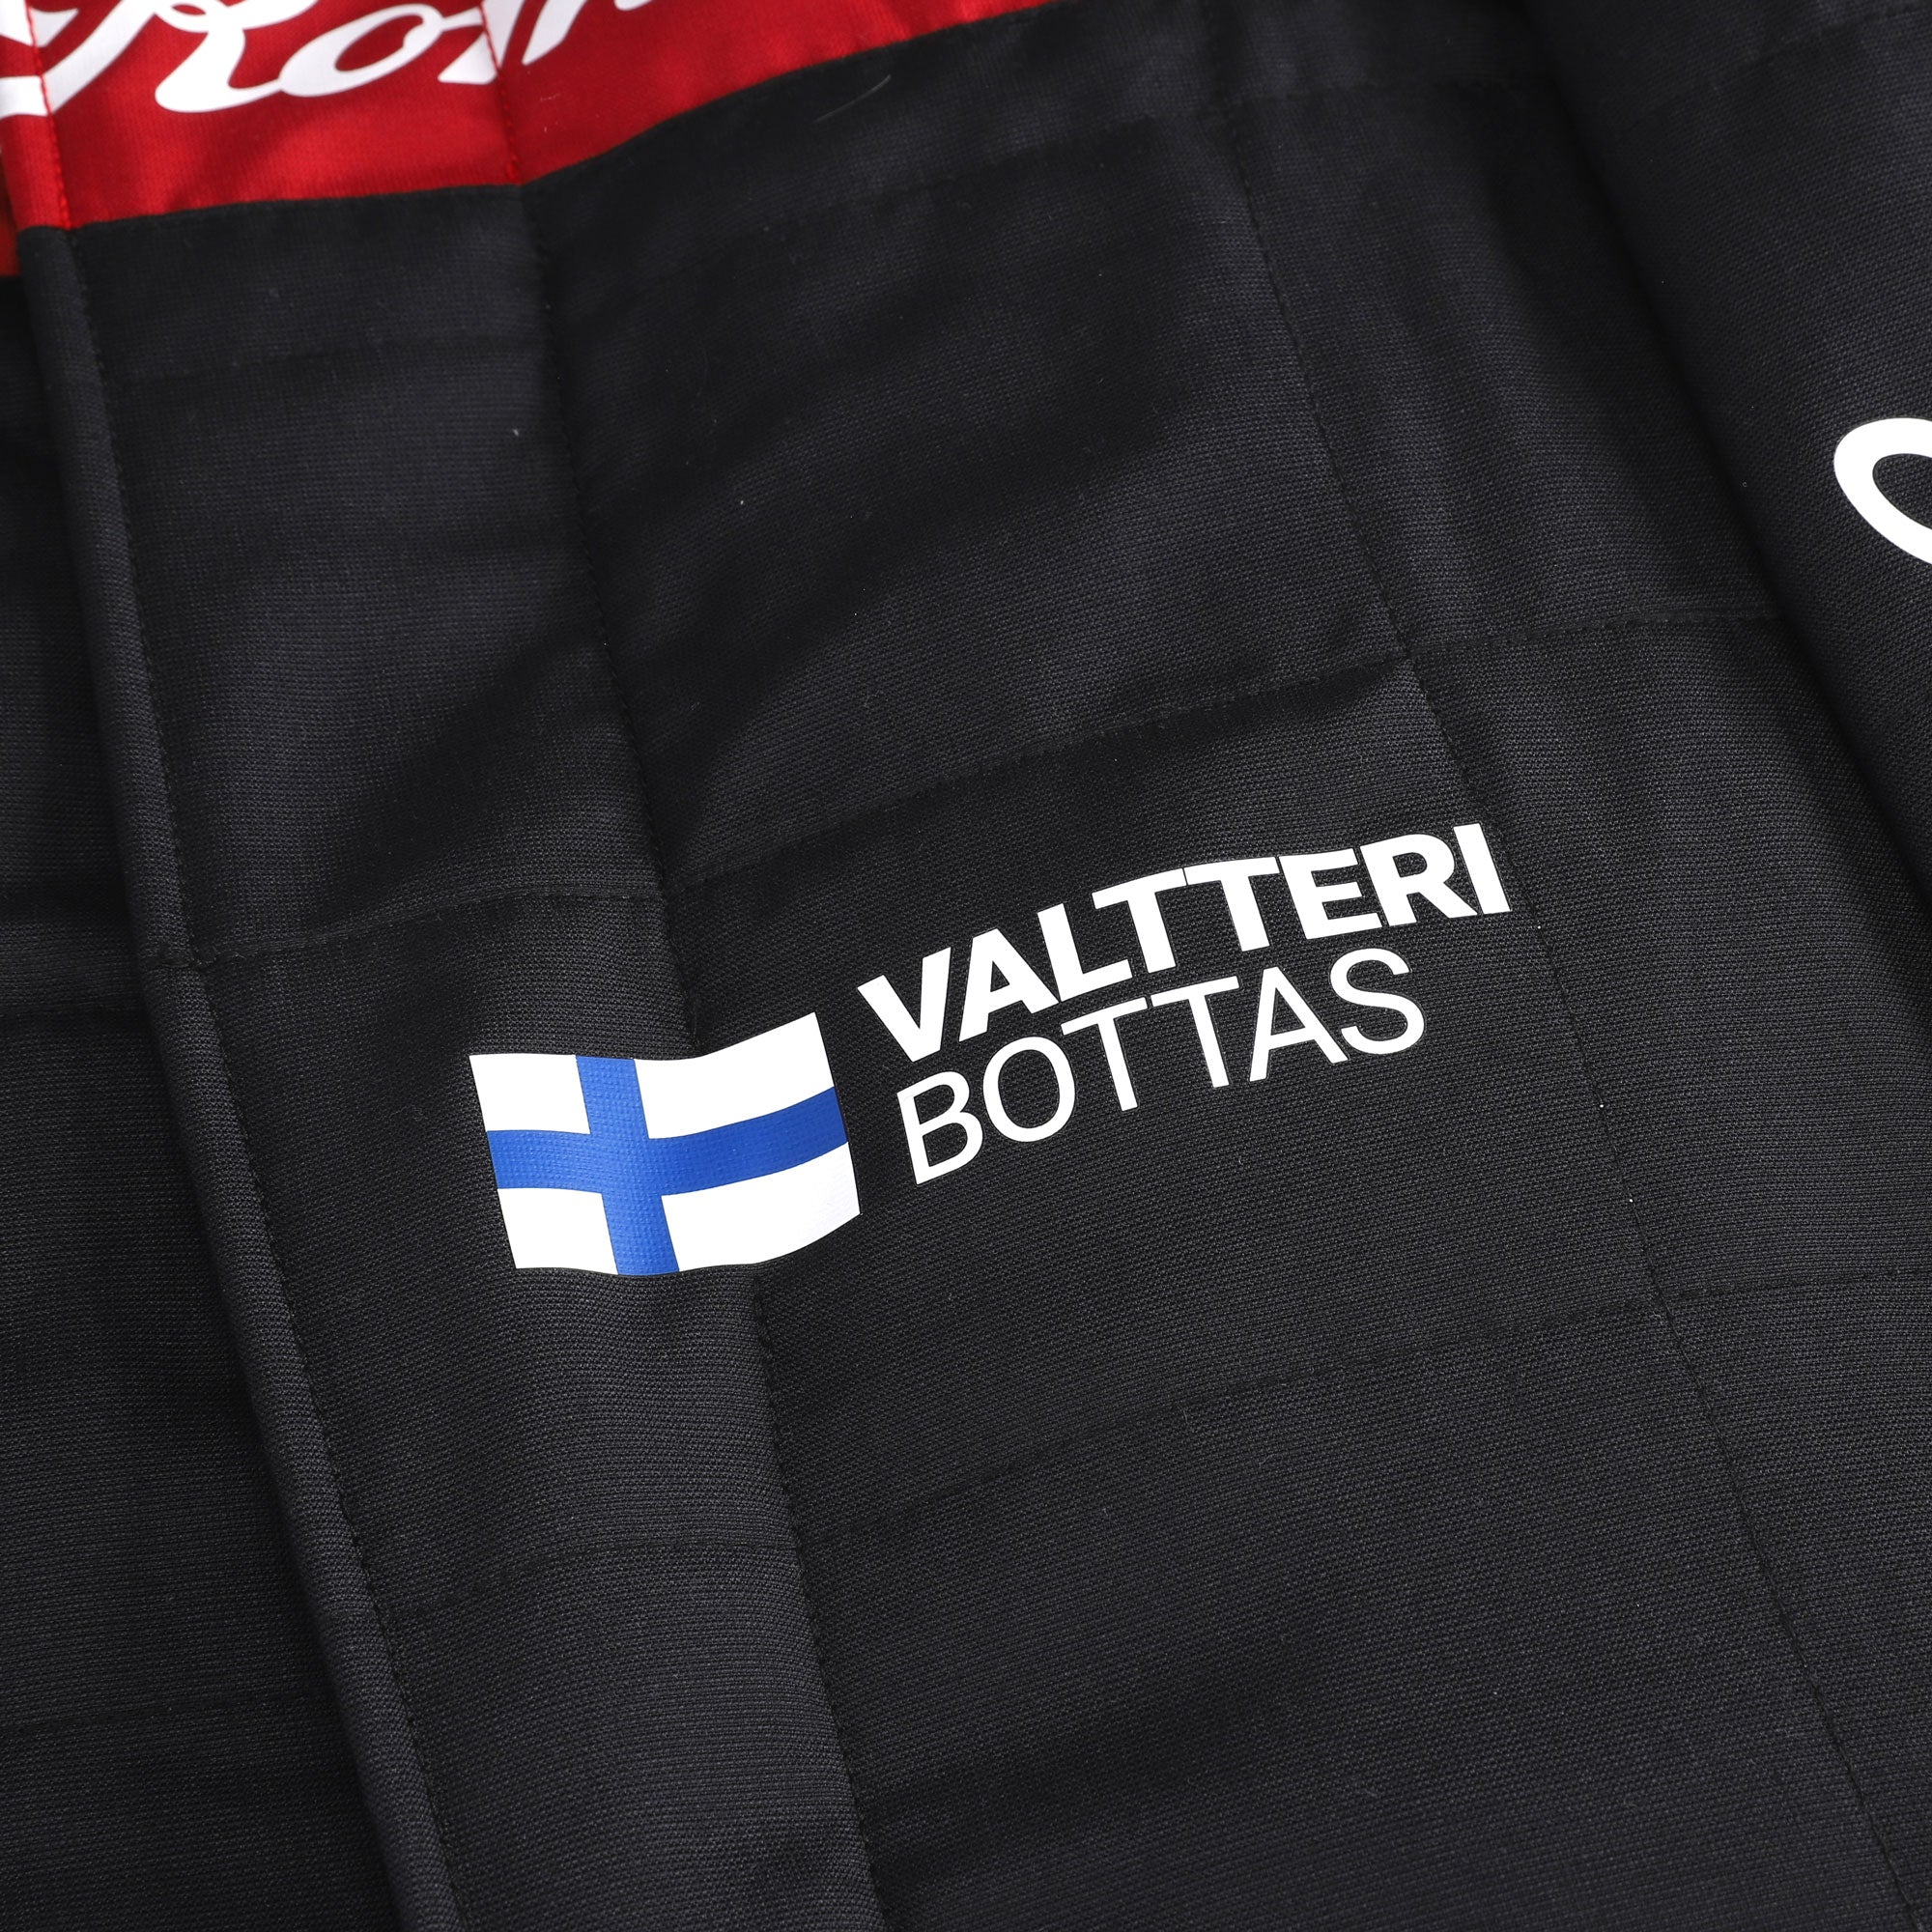 Officially Licensed 2023 Signed Alfa Romeo F1 Team Stake Race Suit - Valtteri Bottas Edition